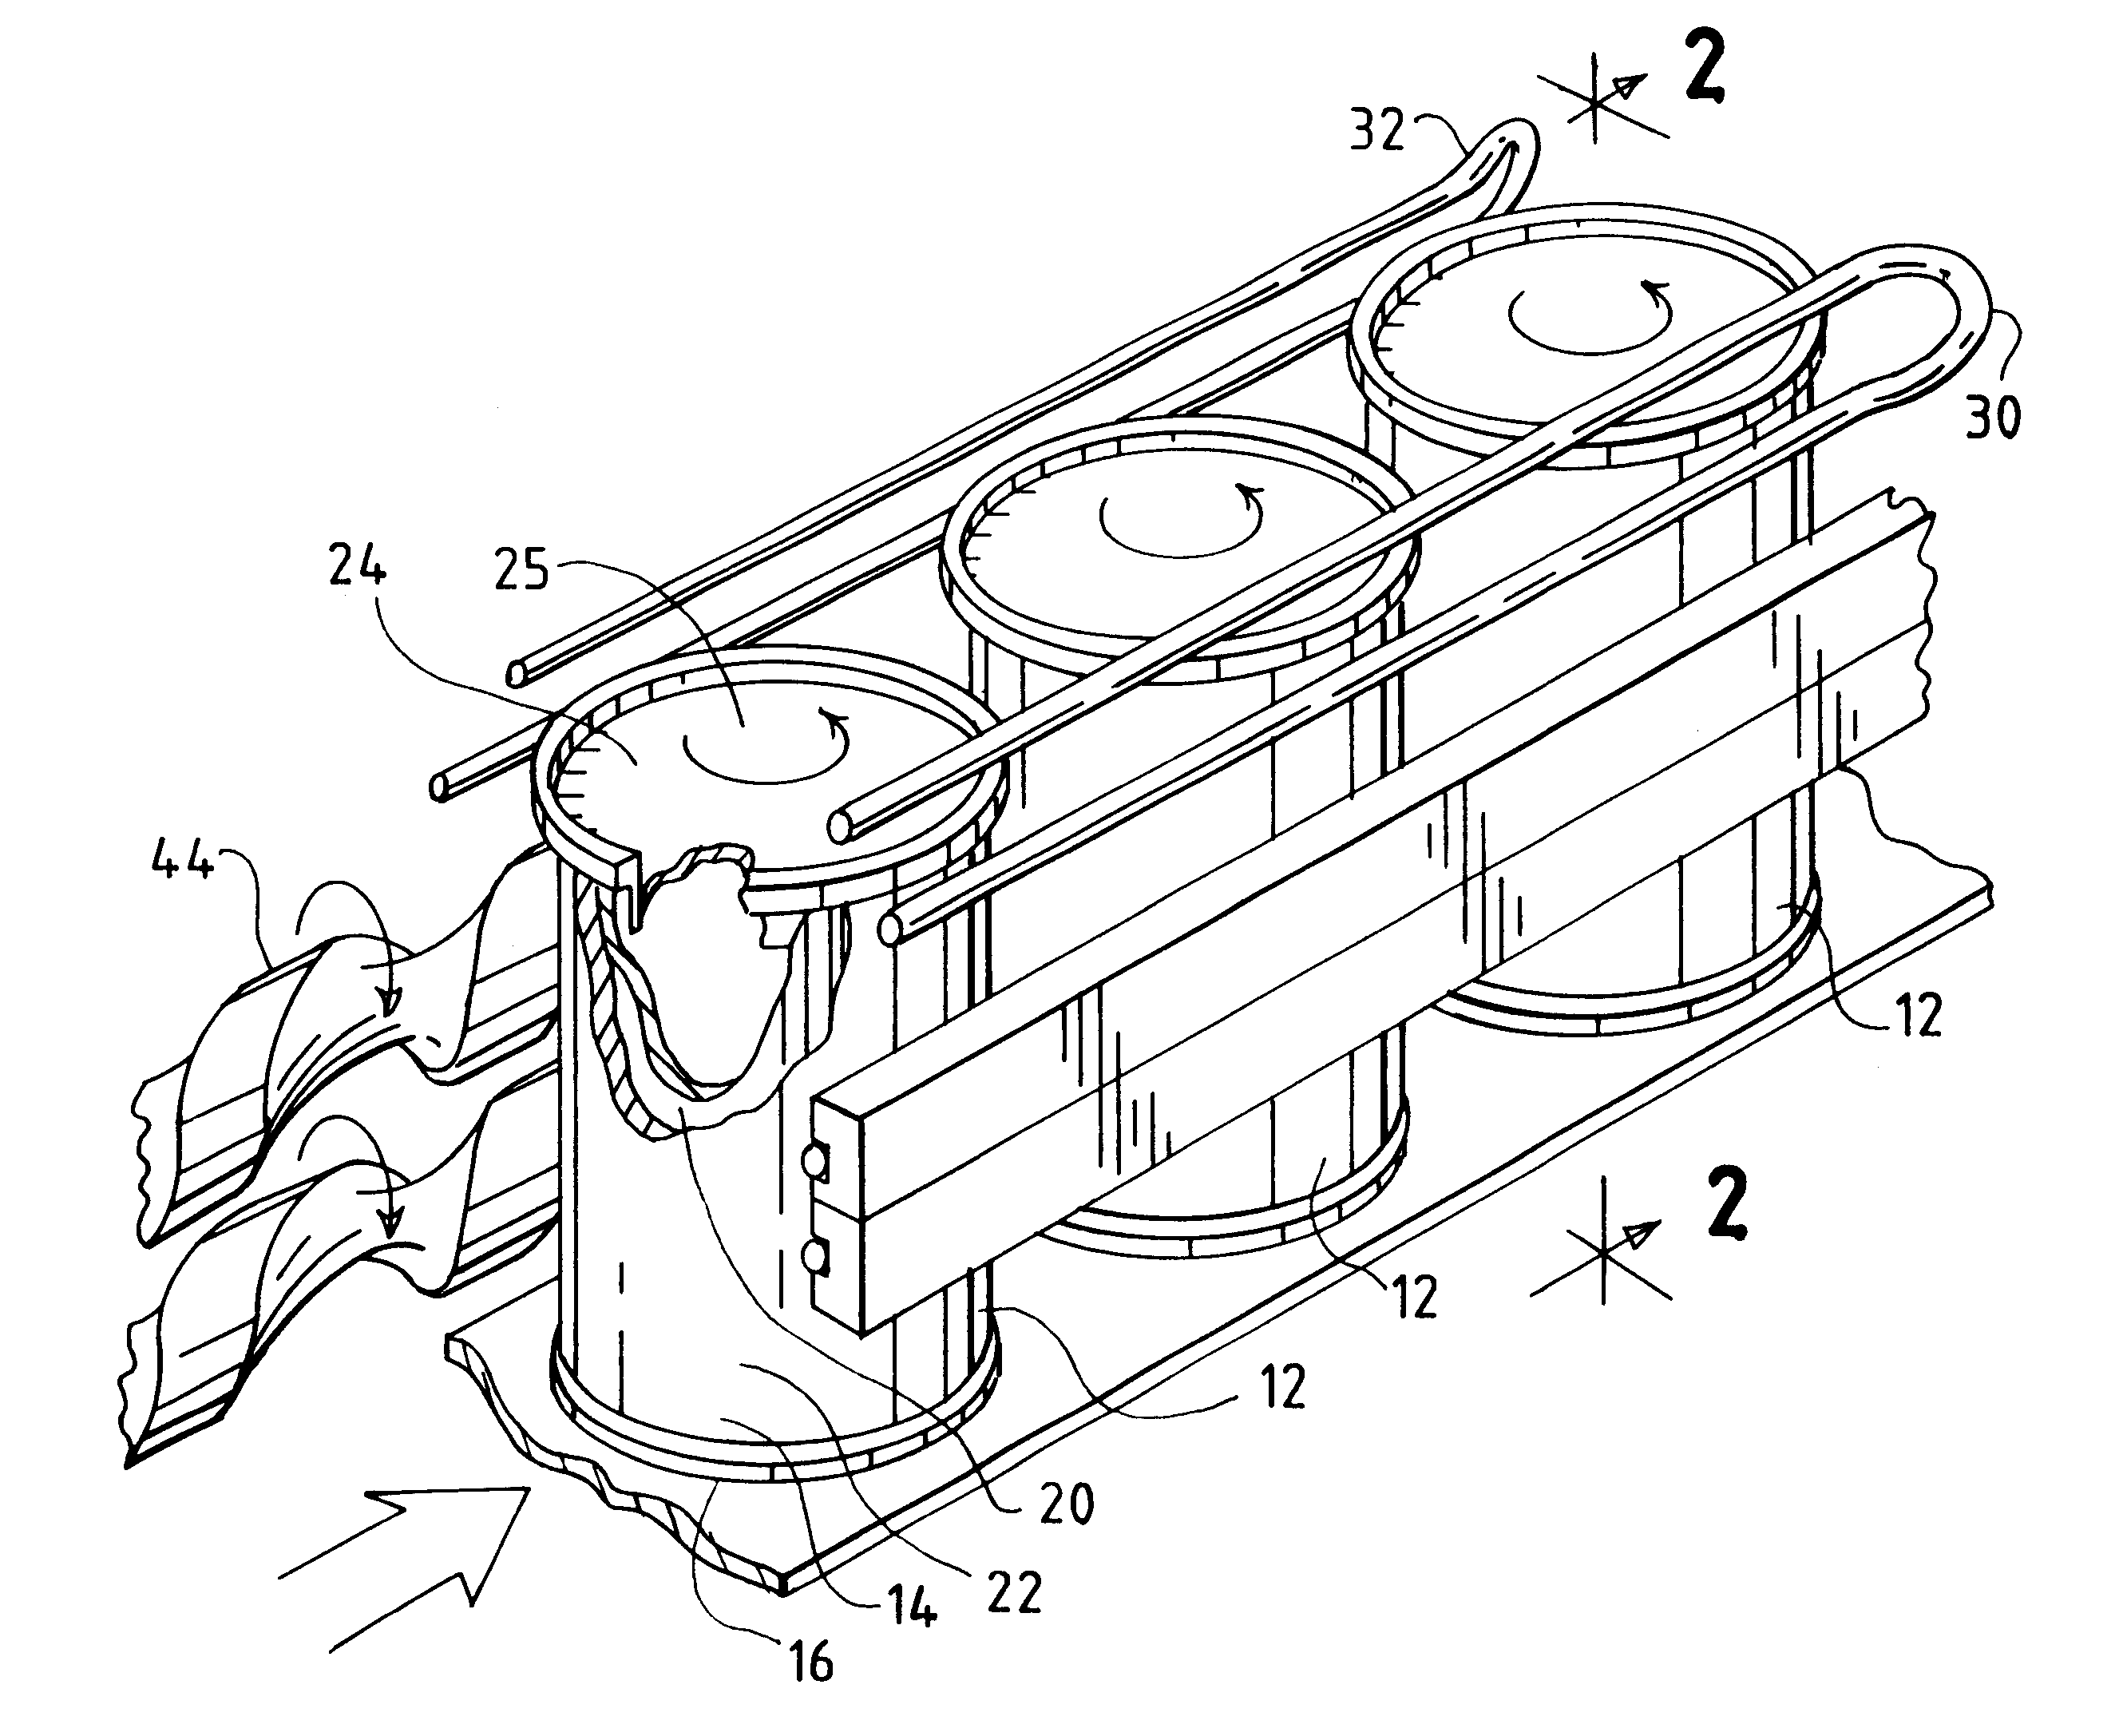 Method for induction sealing a plastic part to a composite container